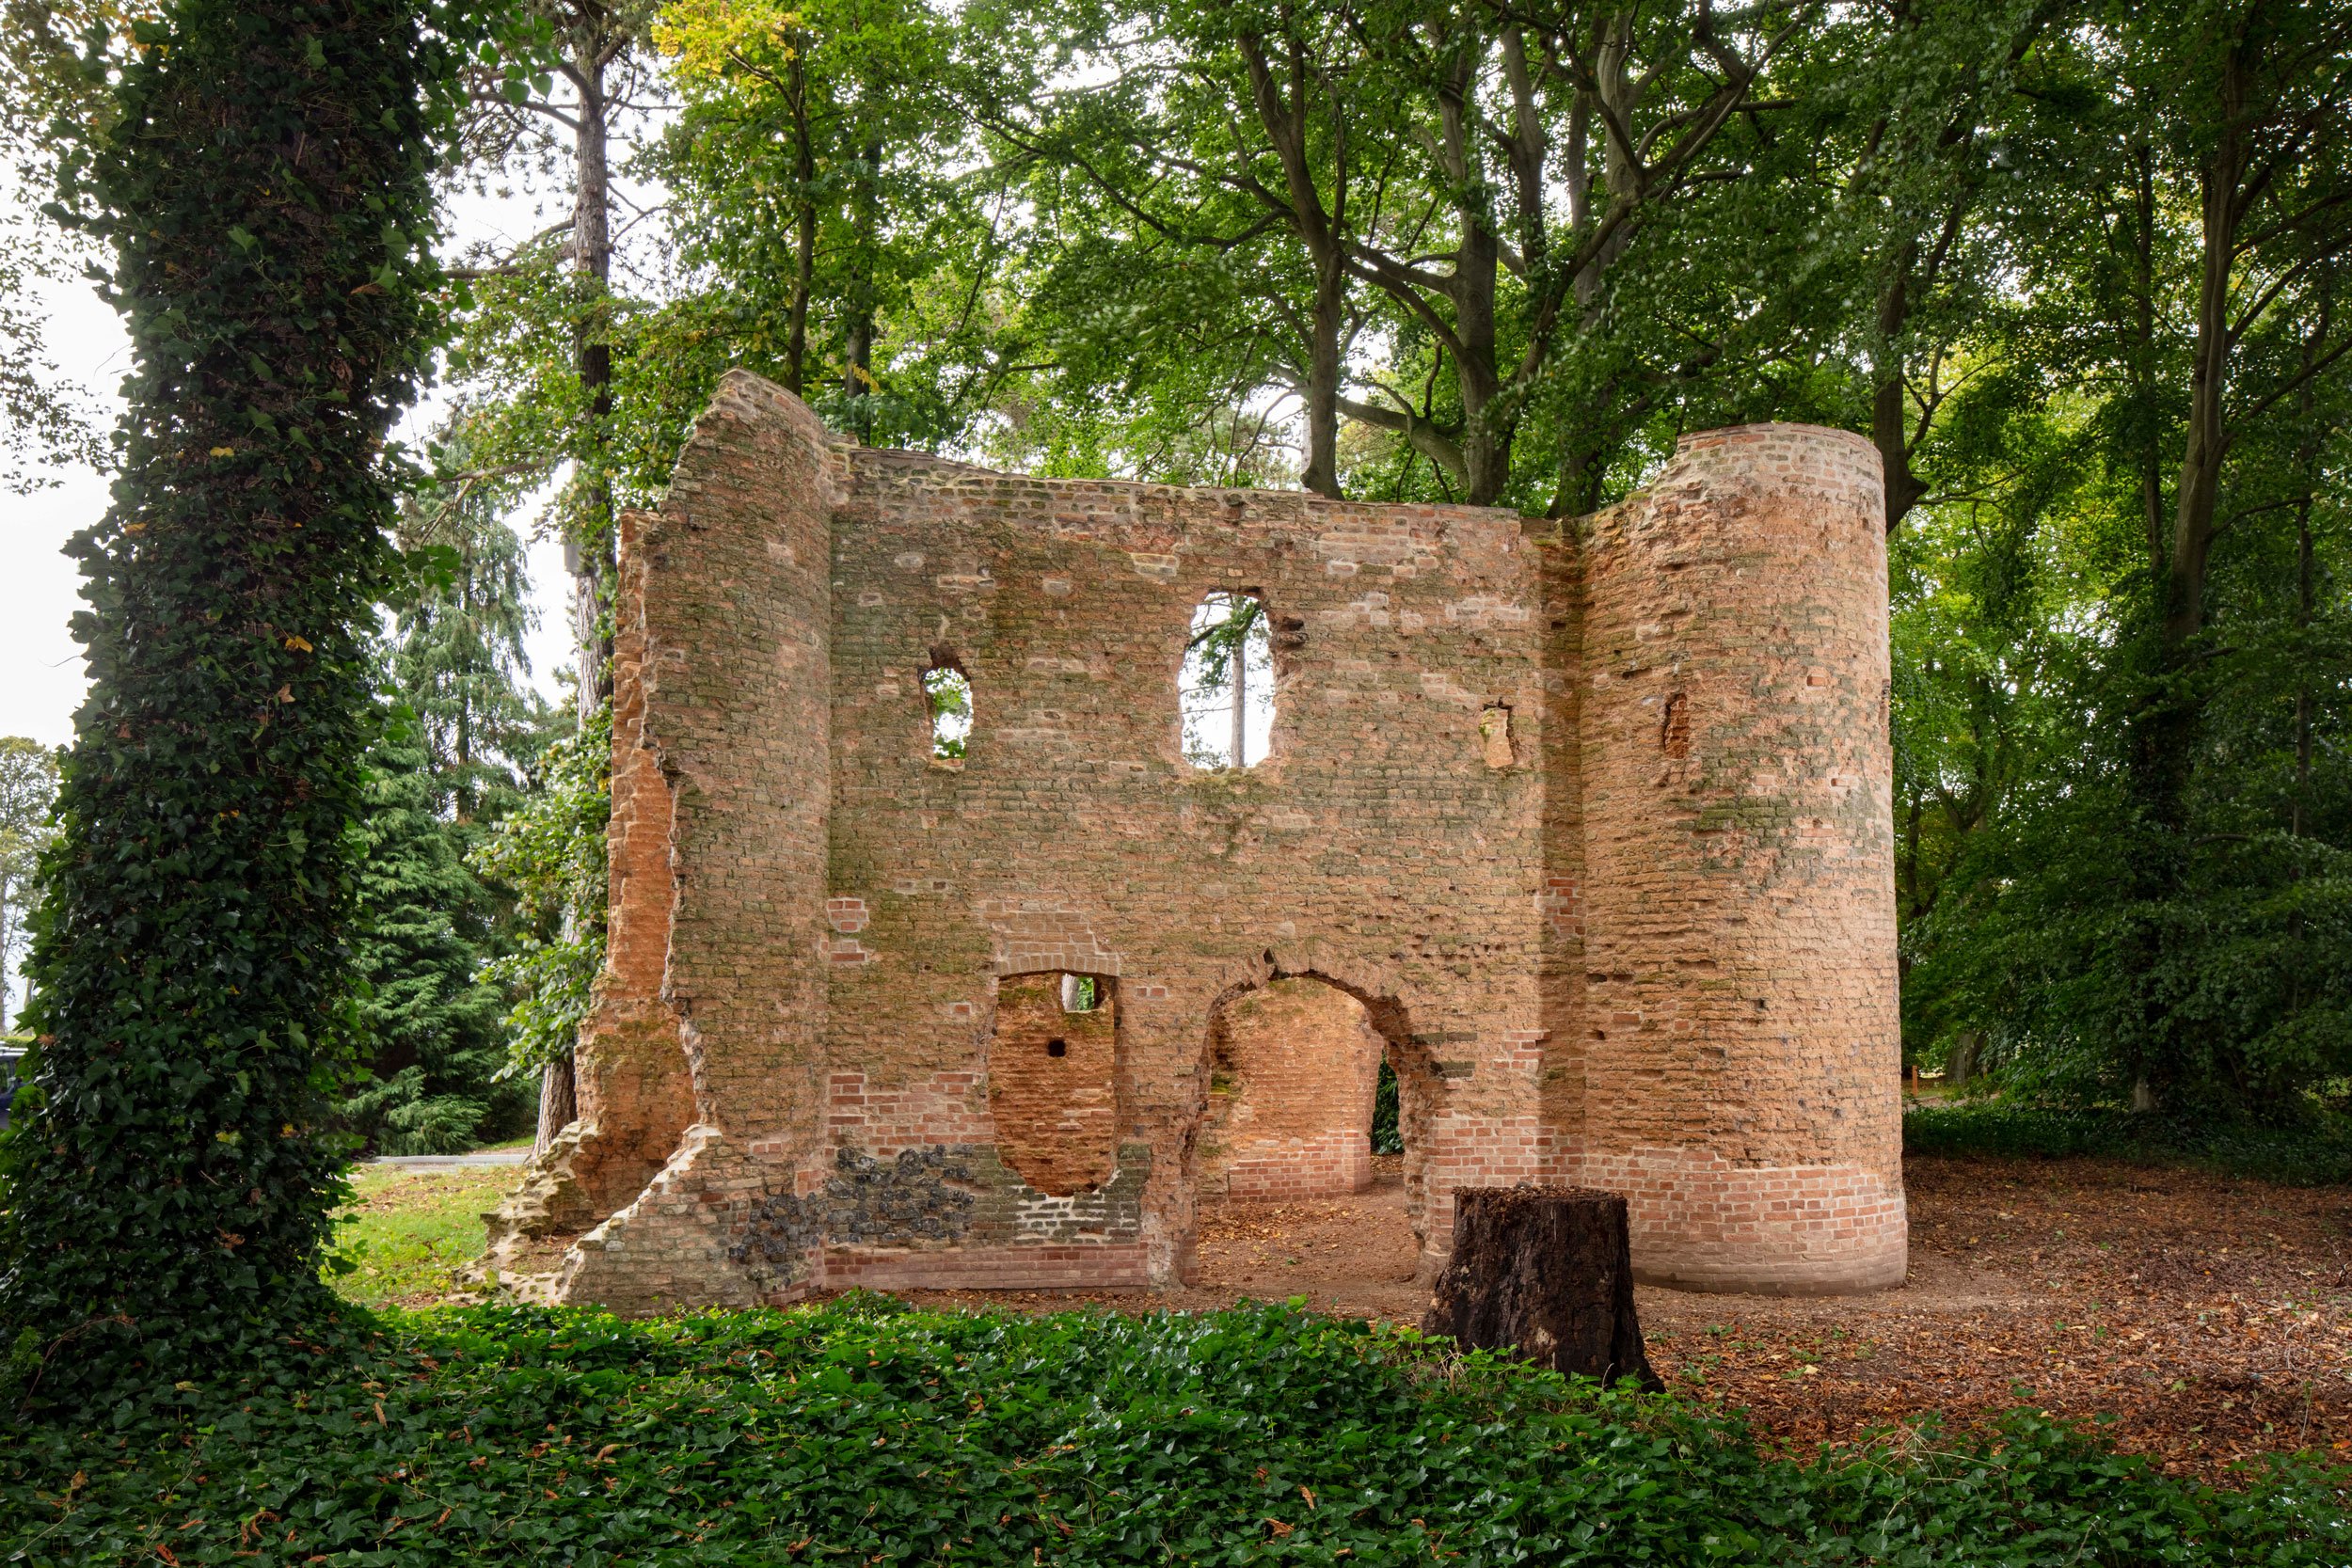 A two-storey brick ruin surrounded by trees that soar above it.